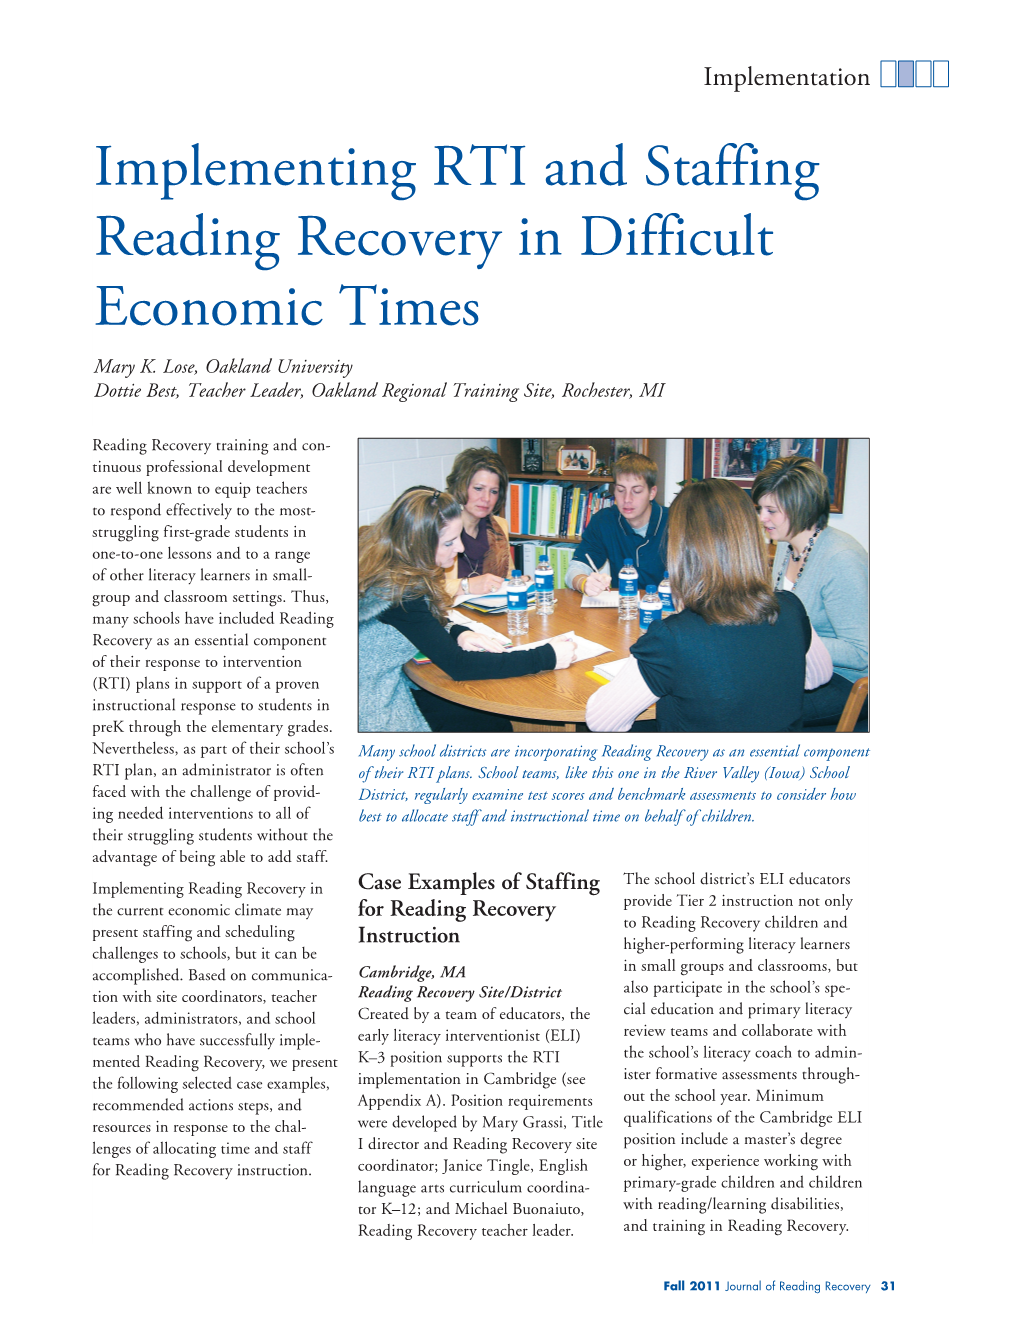 Implementing RTI and Staffing Reading Recovery in Difficult Economic Times Mary K